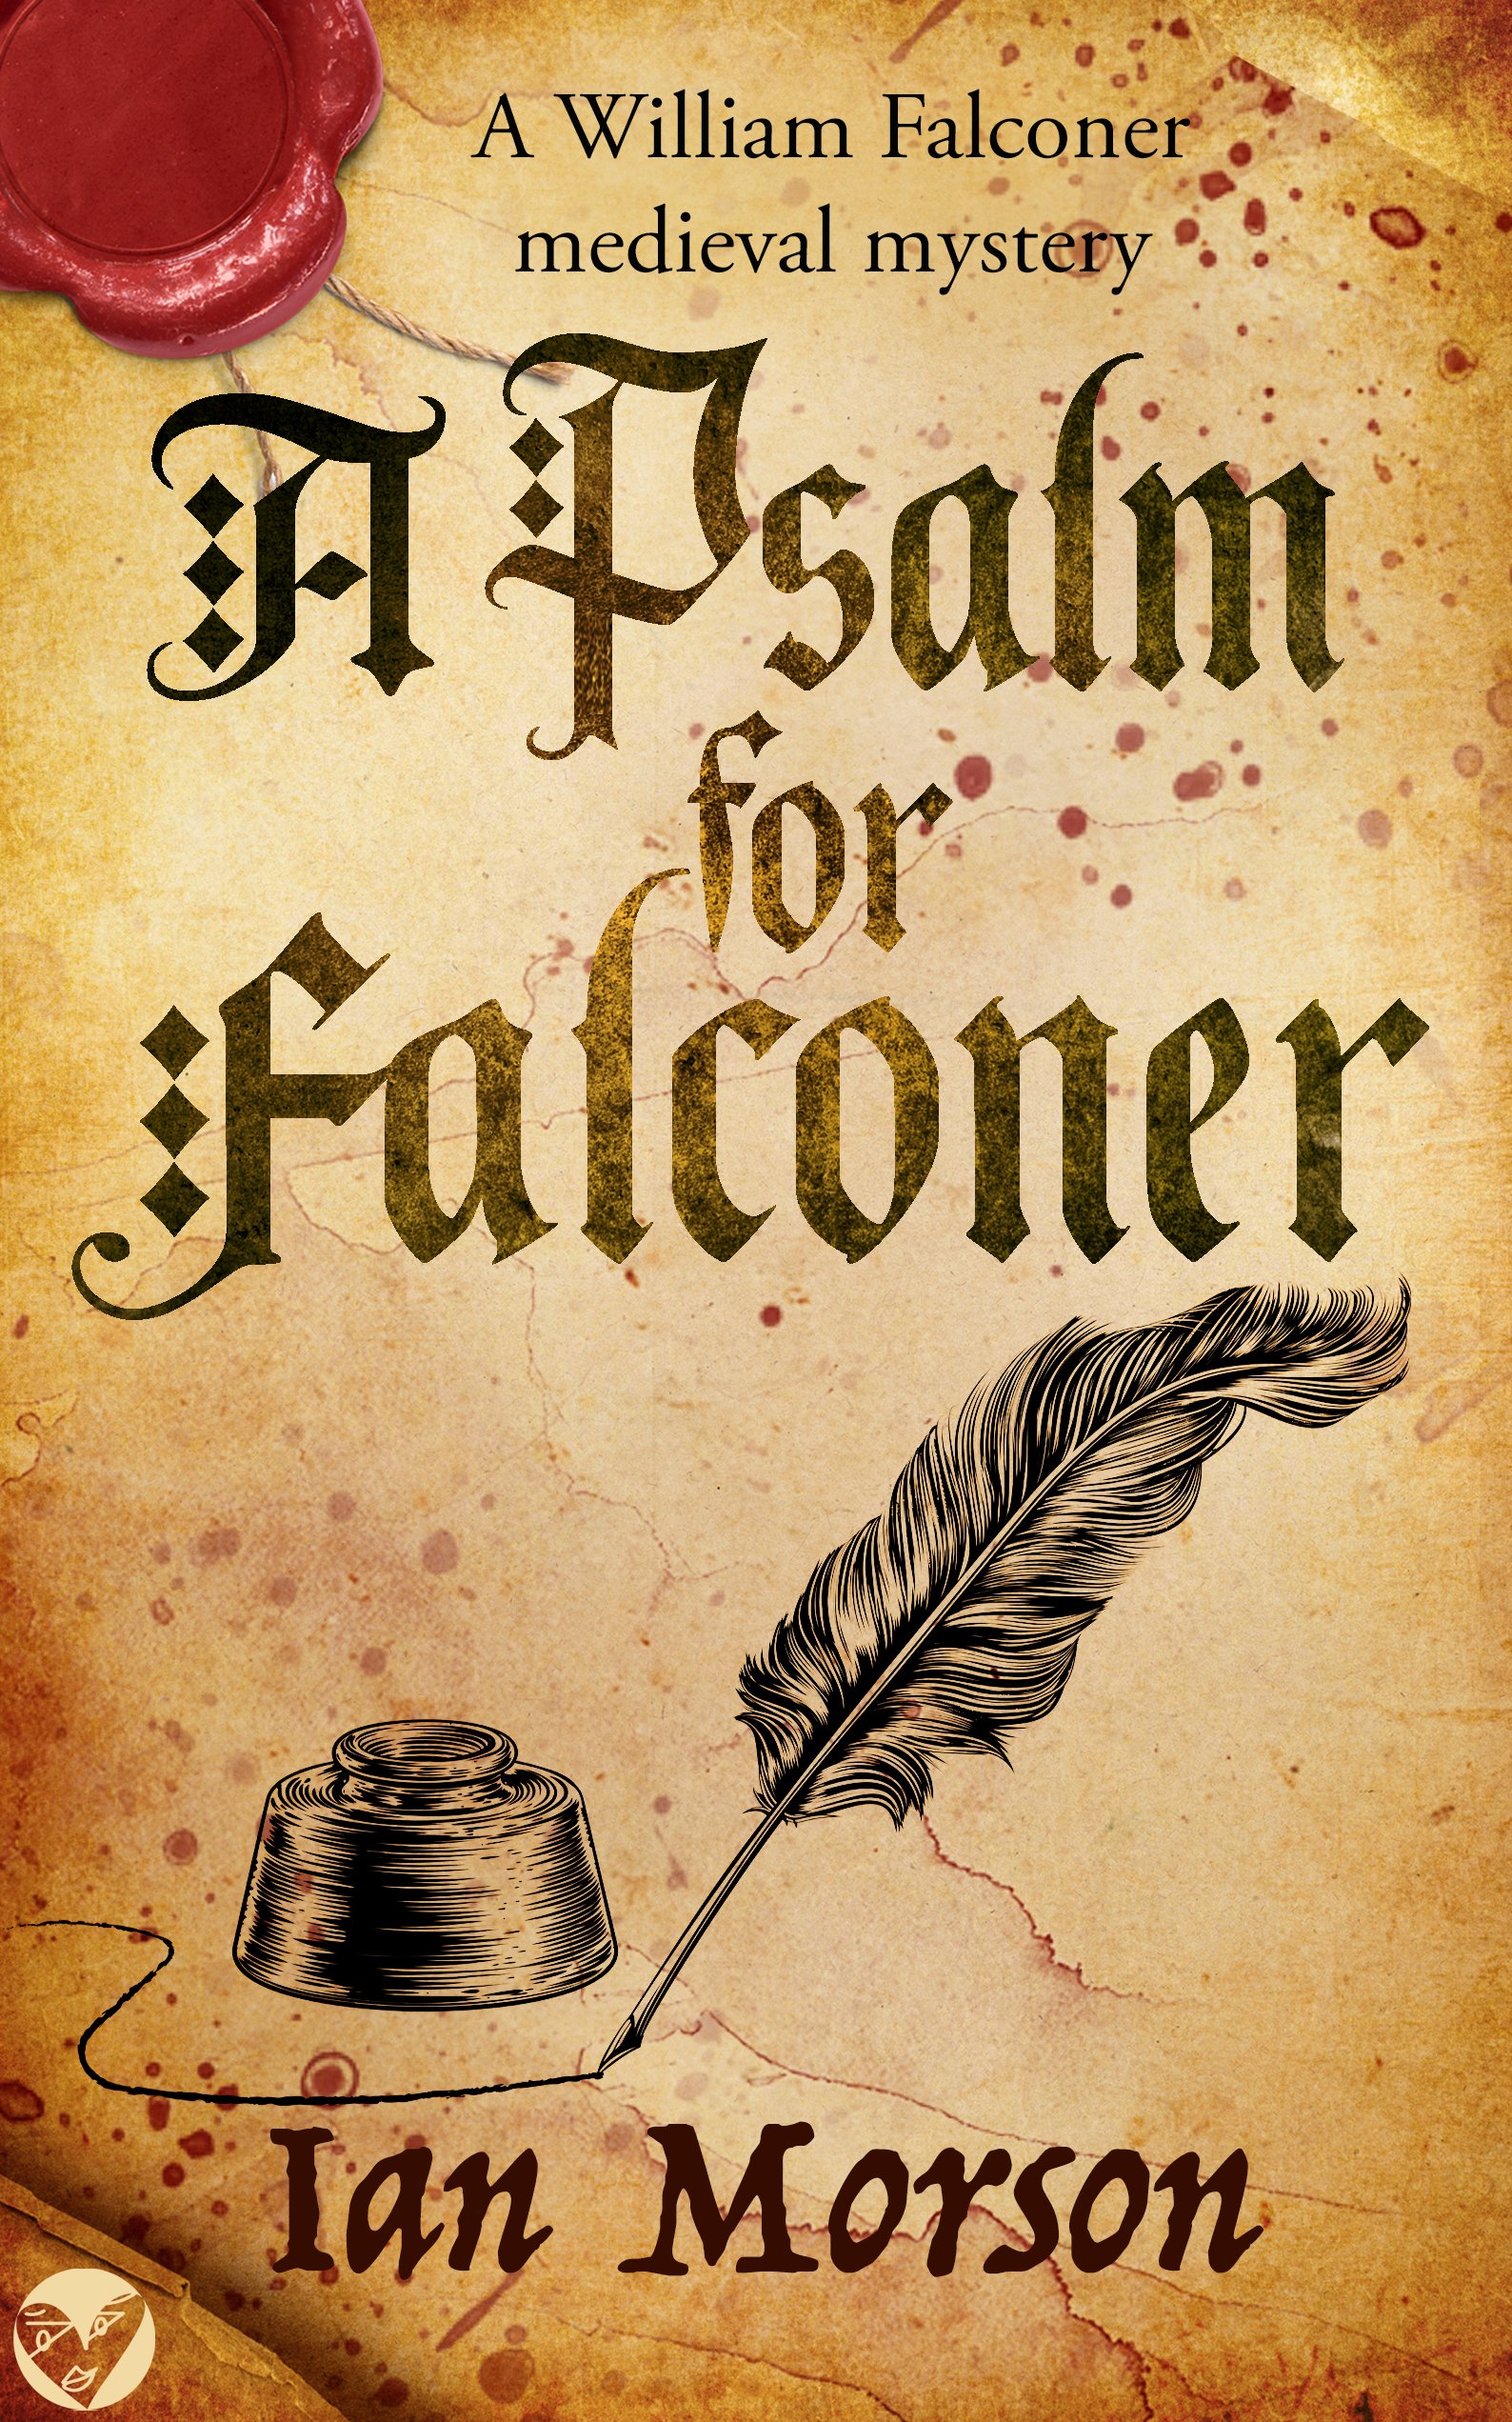 A PSALM FOR FALCONER Cover publish.jpg